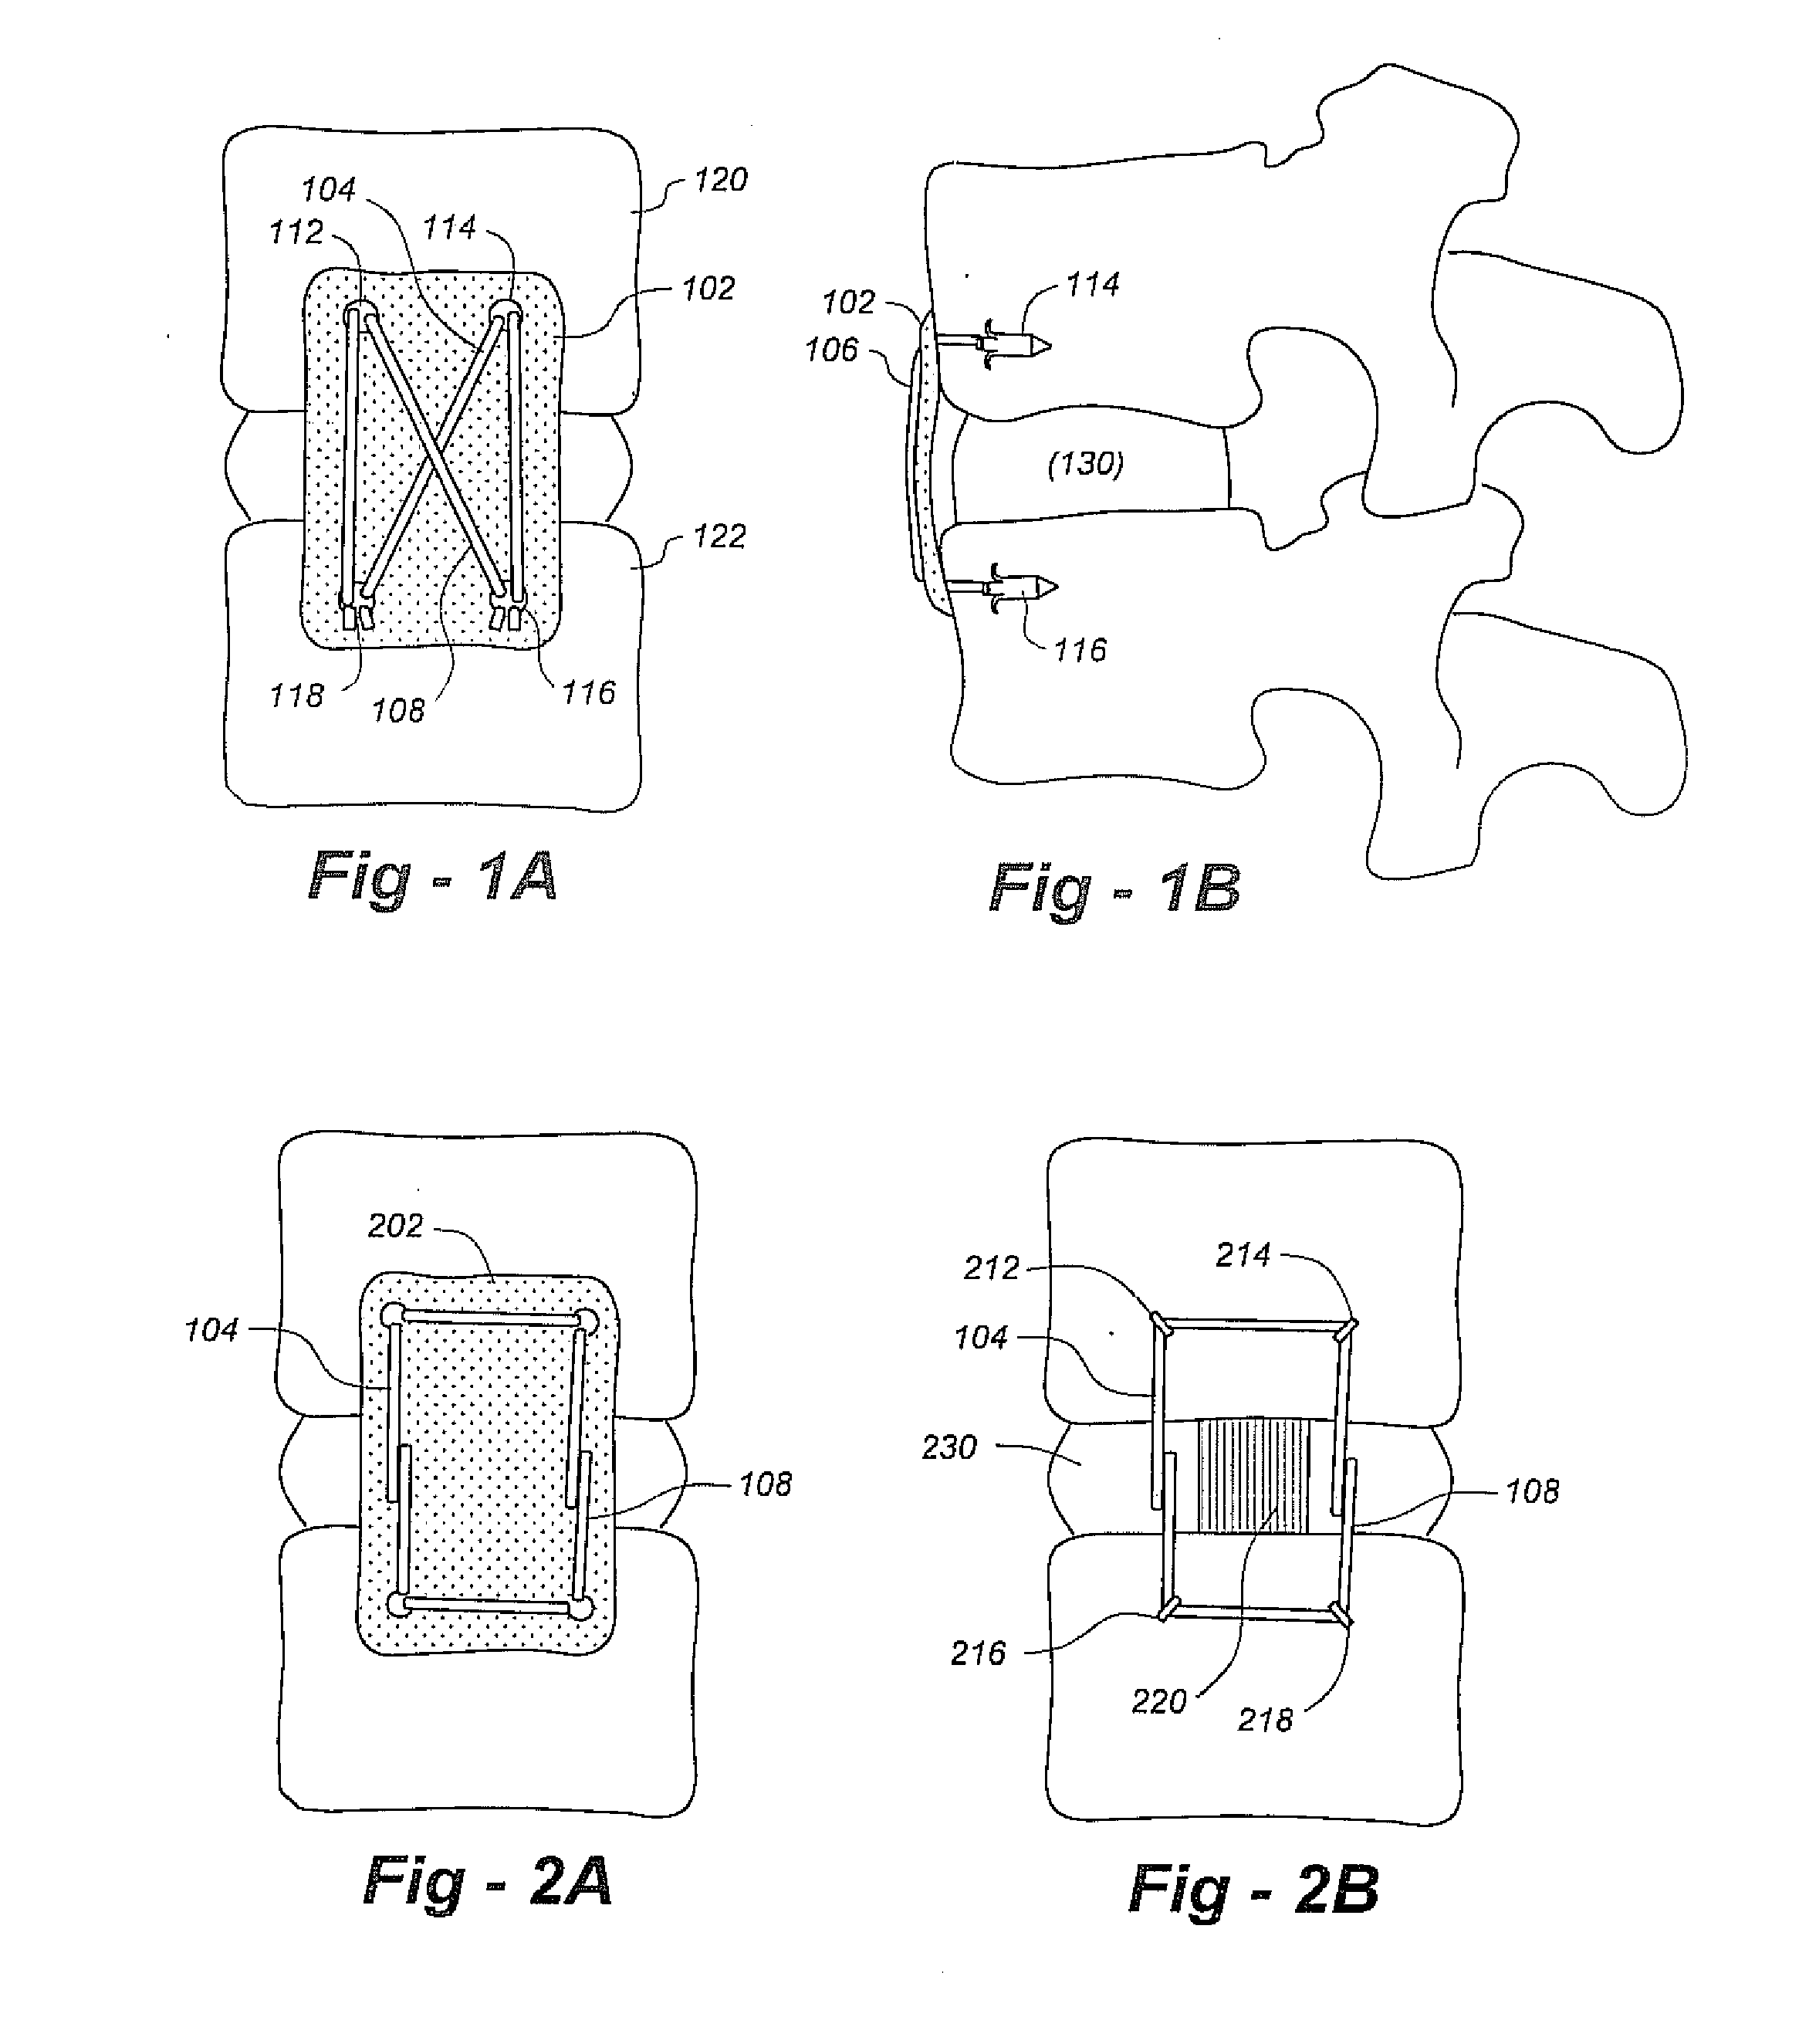 Methods and apparatus for repairing and/or replacing intervertebral disc components and promoting healing